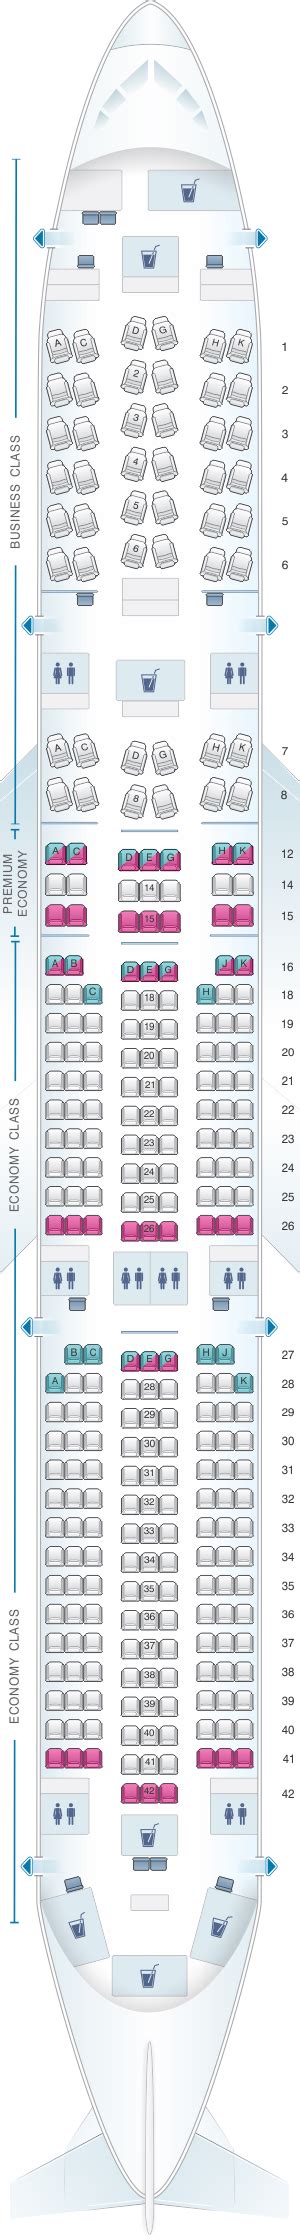 Seat Map Airbus A350 900 Finnair Best Seats In The Plane Porn Sex Picture